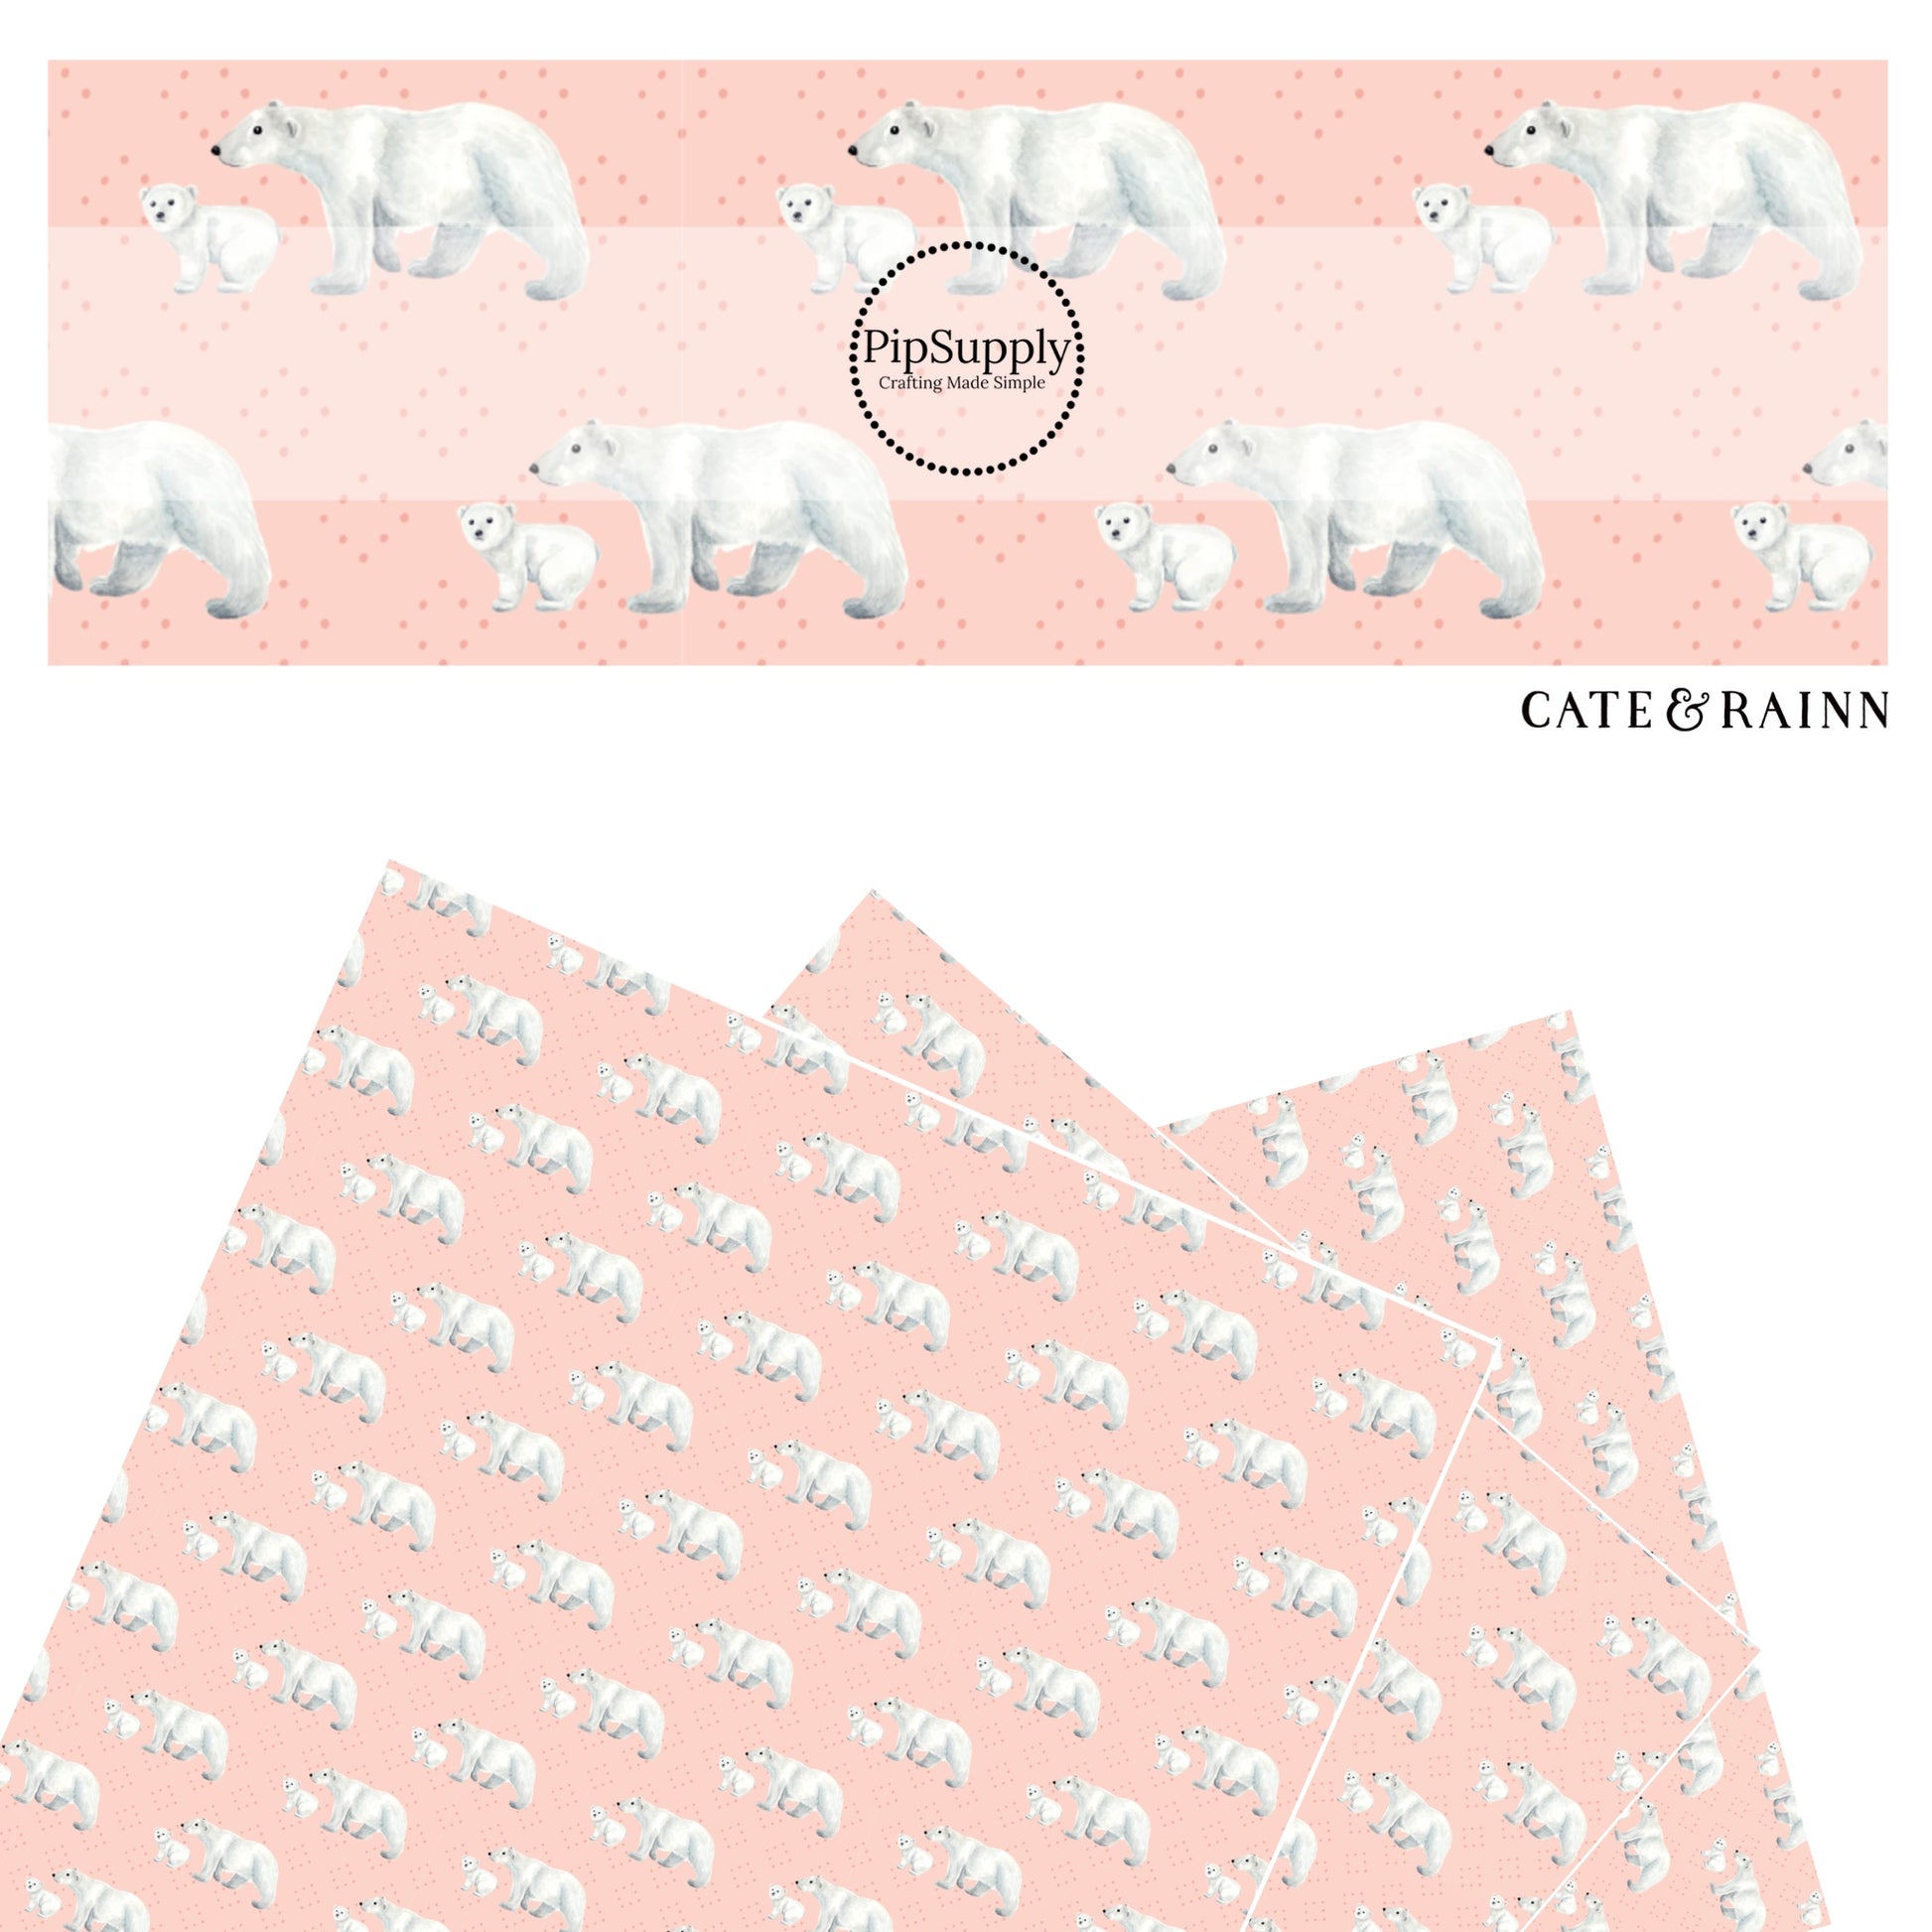 White polar bears with polka dots on peach faux leather sheets